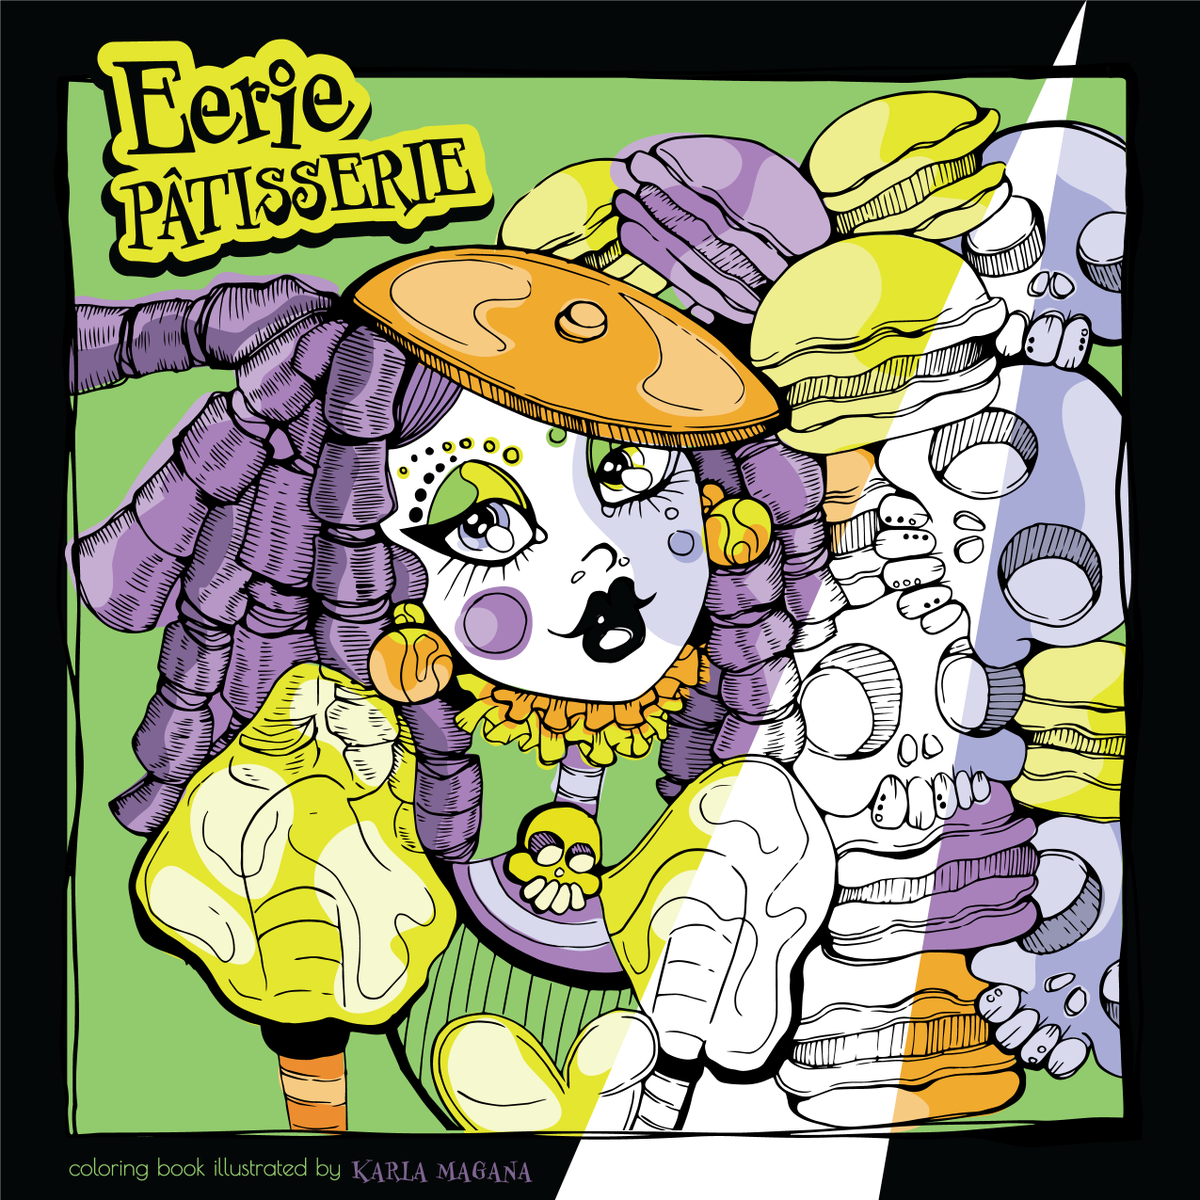 My new coloring book Eerie Patisserie was released this week - I'm thrilled that everyone is enjoying the square format! I thought it was a cute little change-up for this book. #spookygirls #adultcoloring #eeriepatisserie